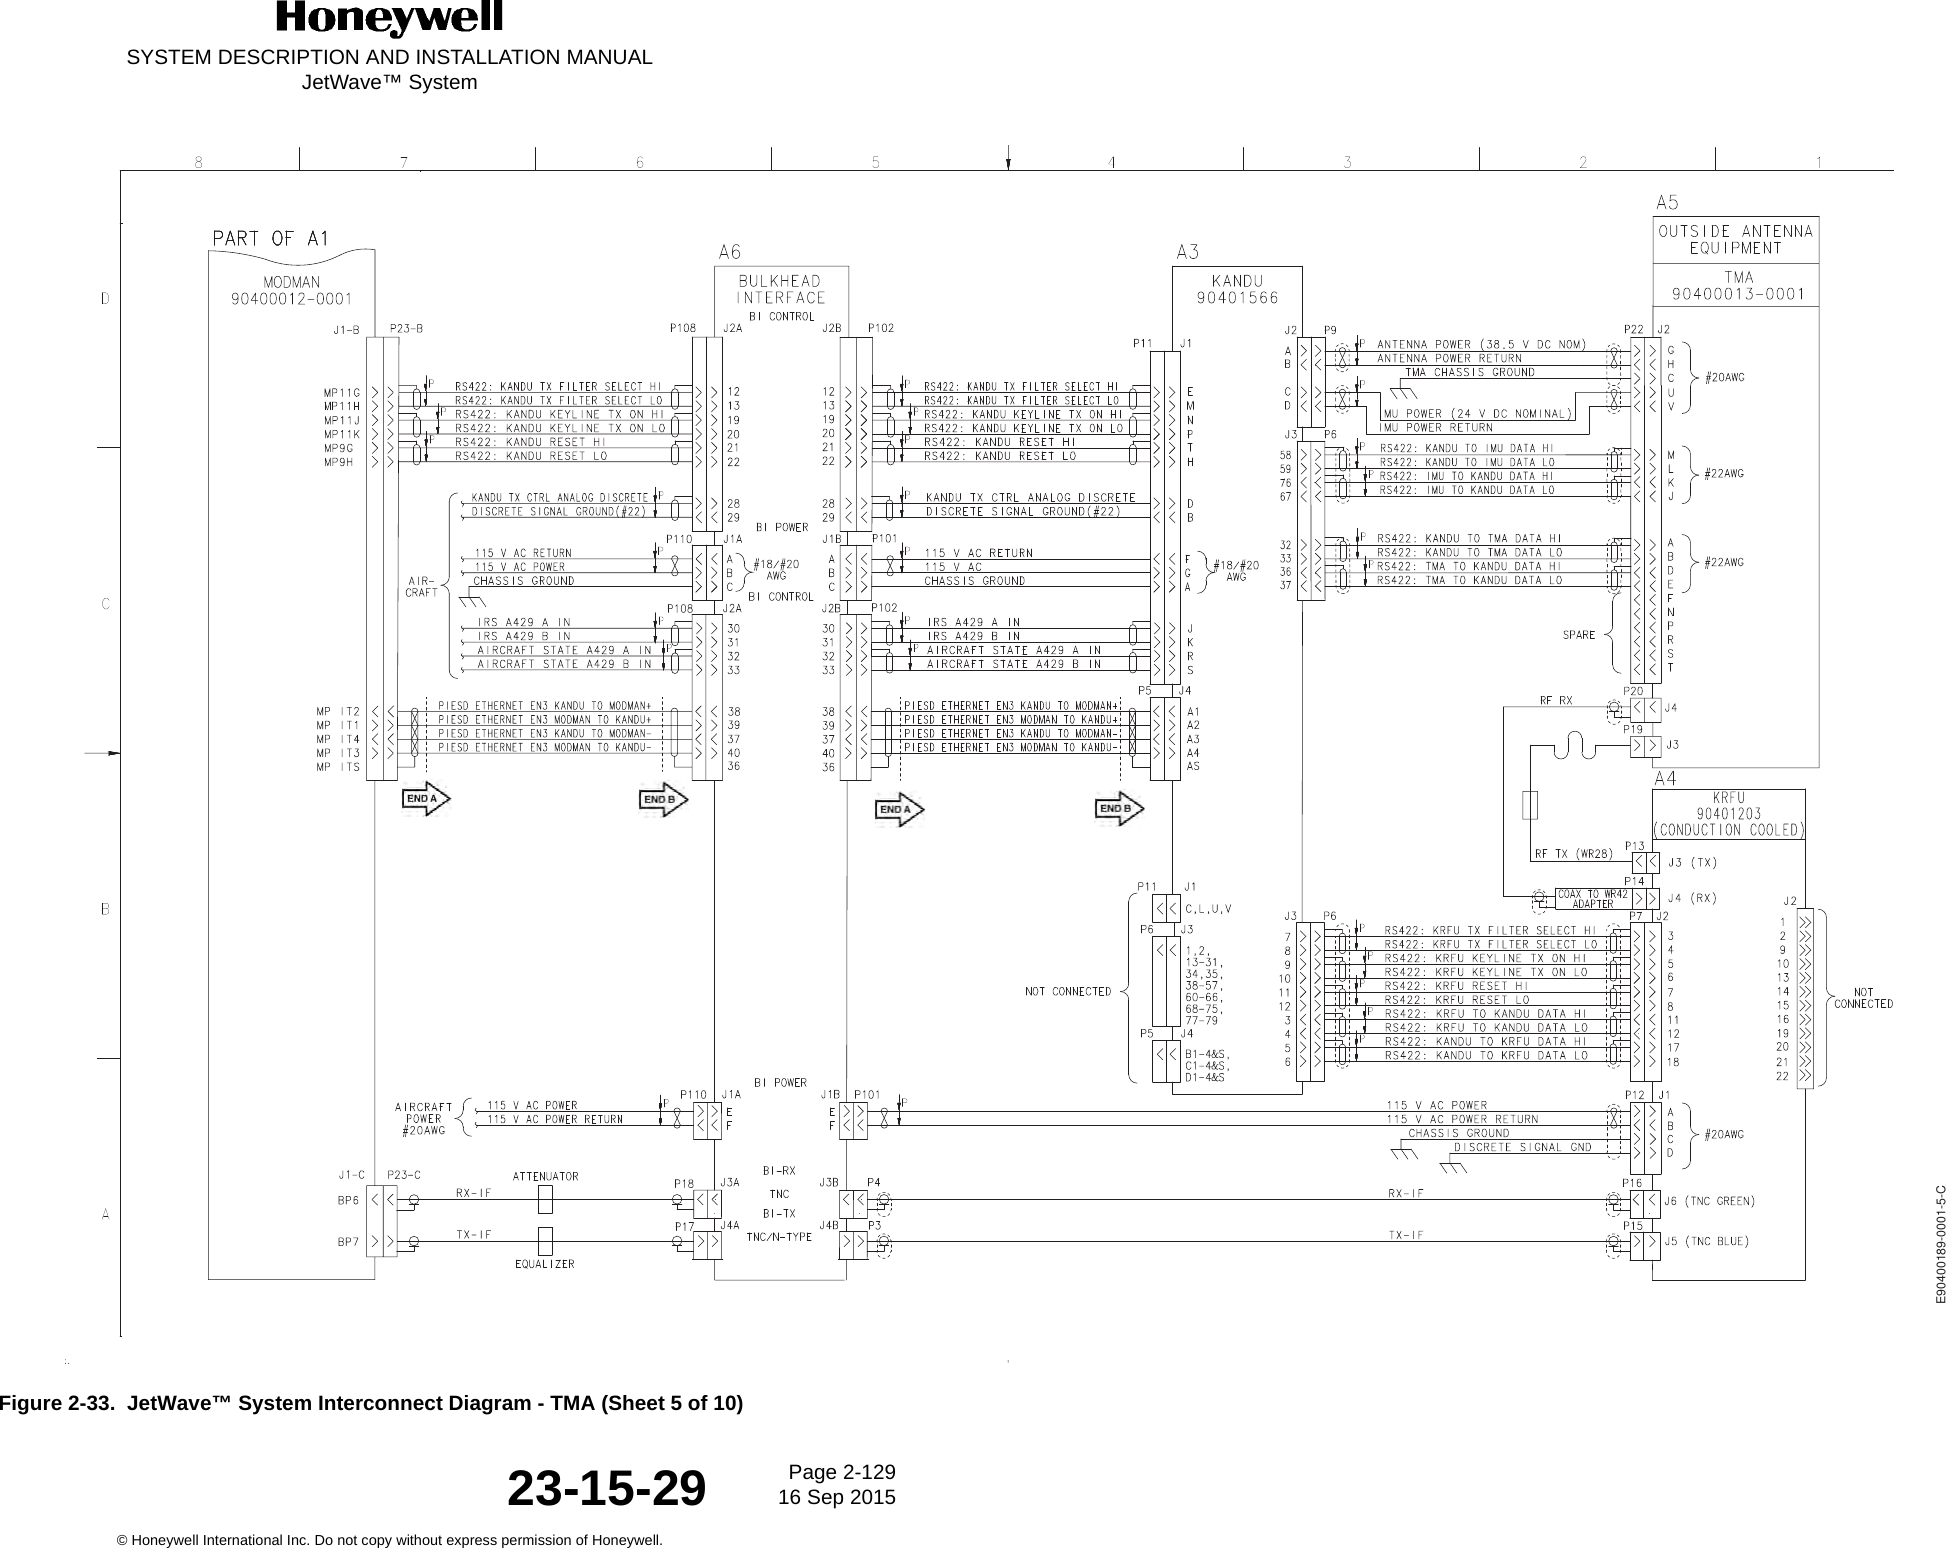 SYSTEM DESCRIPTION AND INSTALLATION MANUALJetWave™ SystemPage 2-129 16 Sep 2015© Honeywell International Inc. Do not copy without express permission of Honeywell.23-15-29Figure 2-33.  JetWave™ System Interconnect Diagram - TMA (Sheet 5 of 10)E90400189-0001-5-C